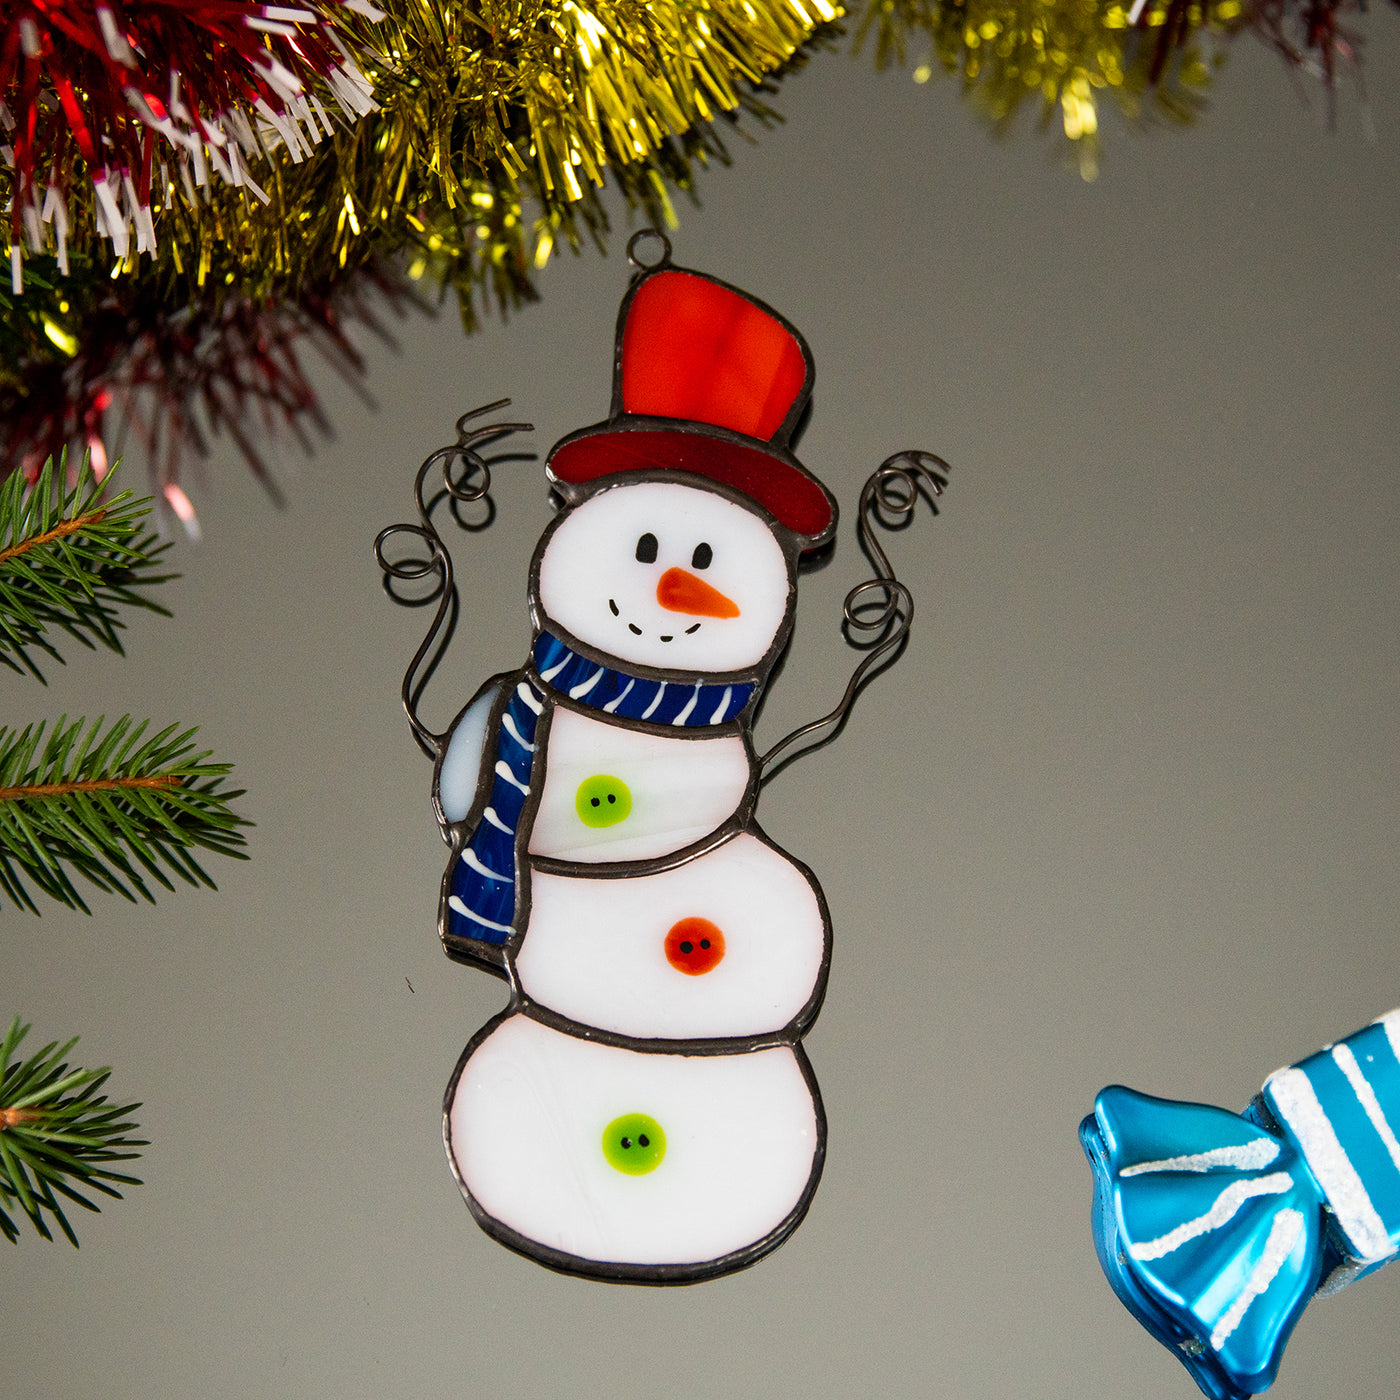 Adorable stained glass Snowman window hanging for Christmas decor